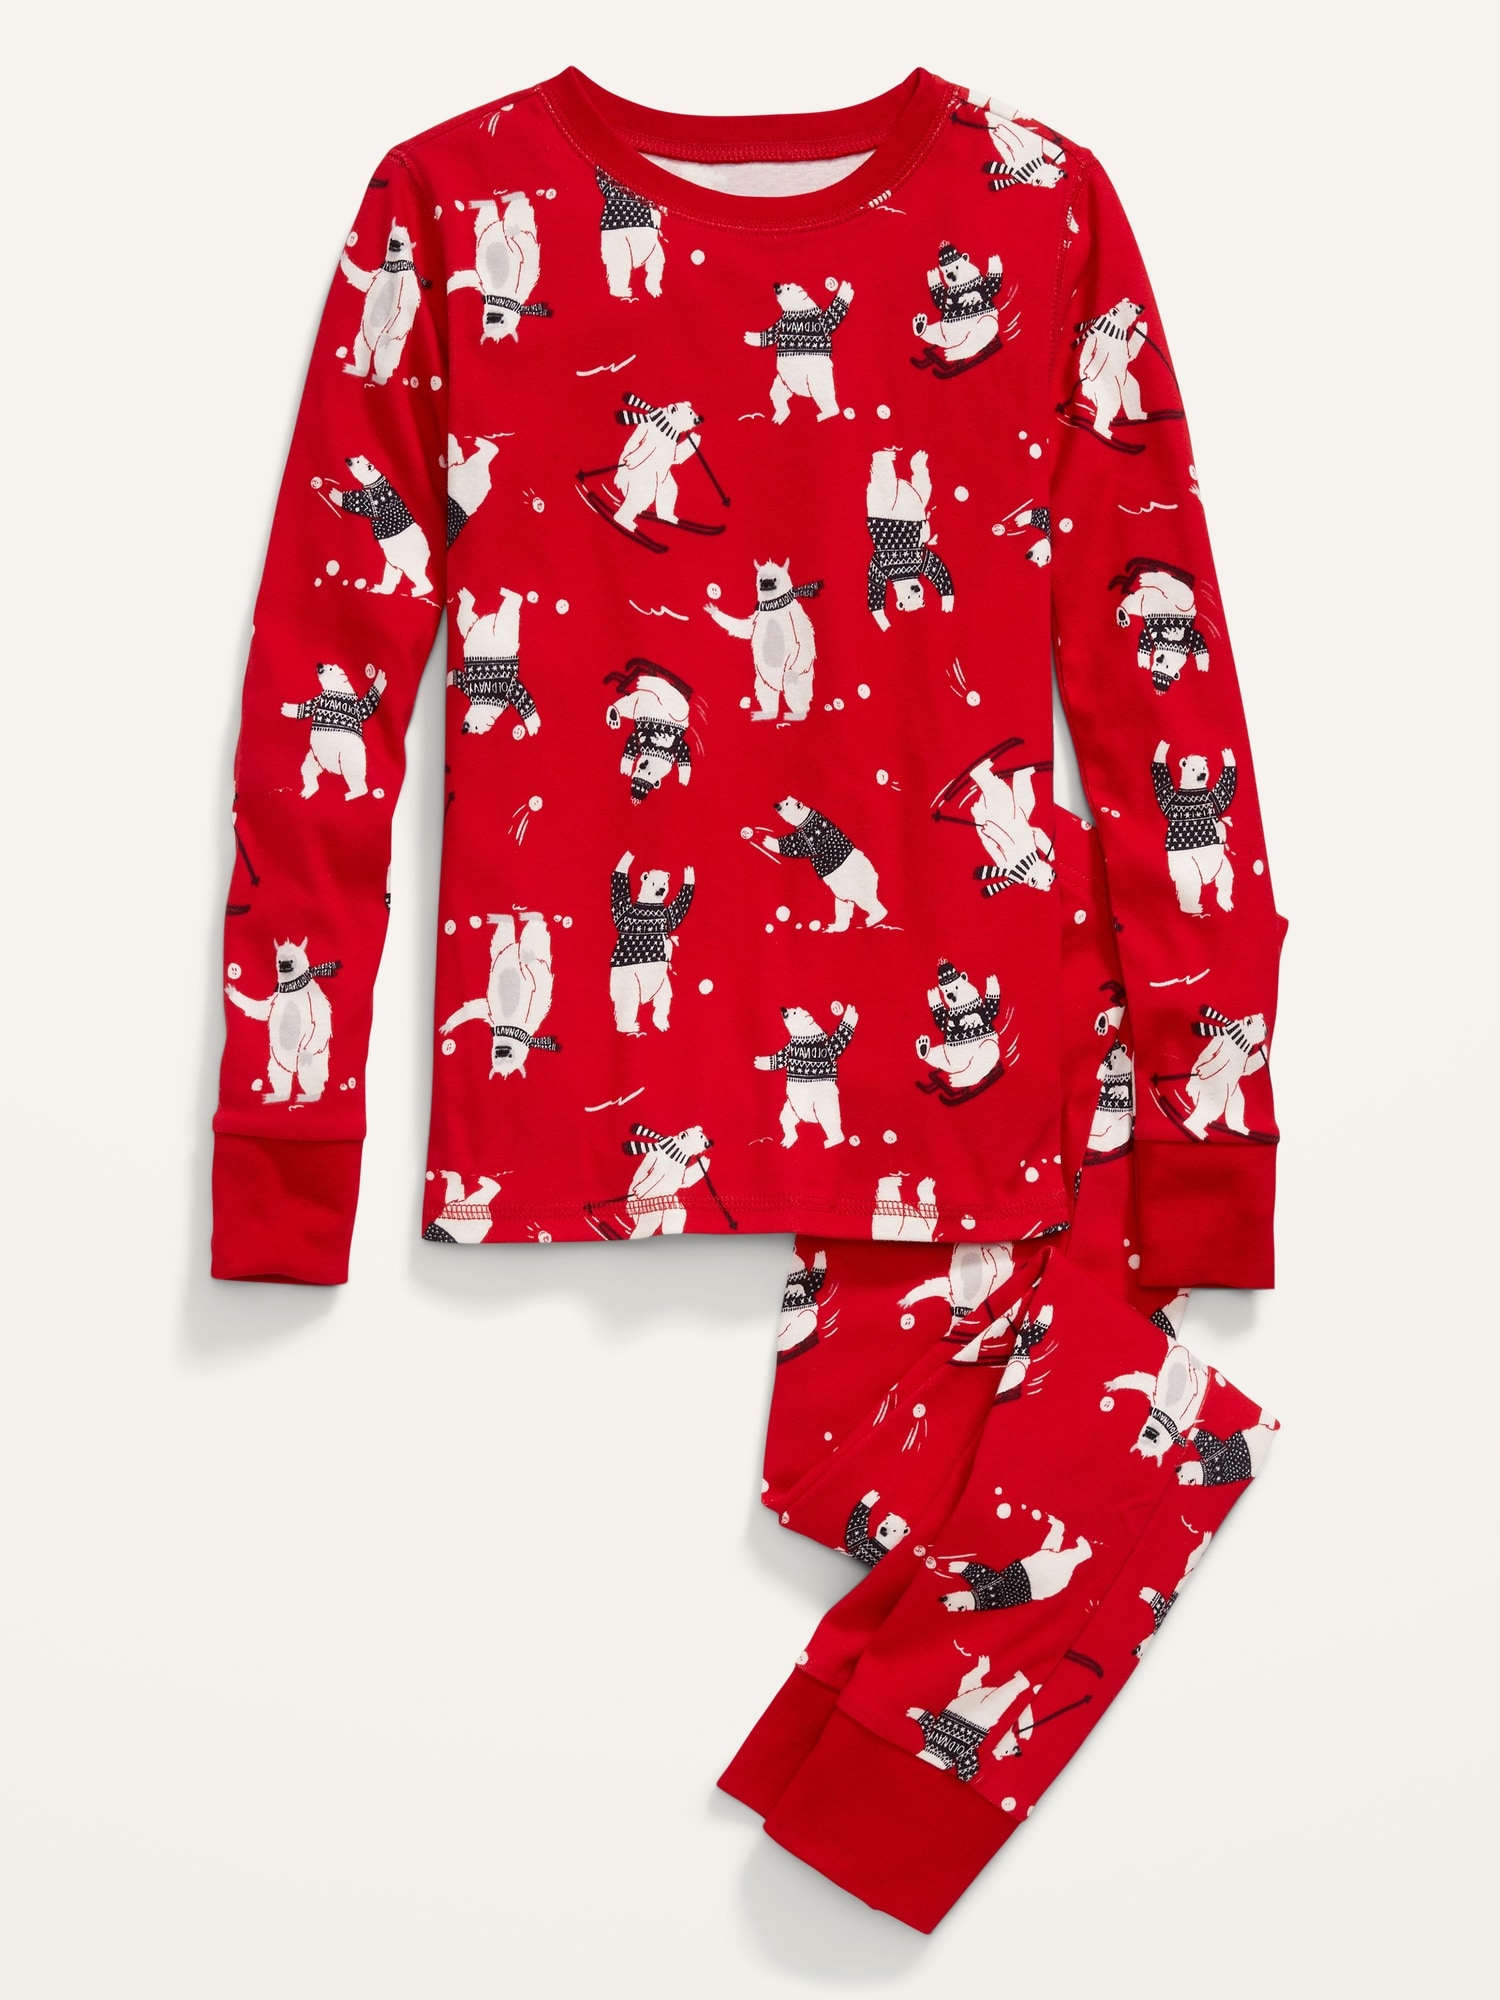 Holiday Matching Graphic Gender-Neutral Snug-Fit Pajama Set for Kids